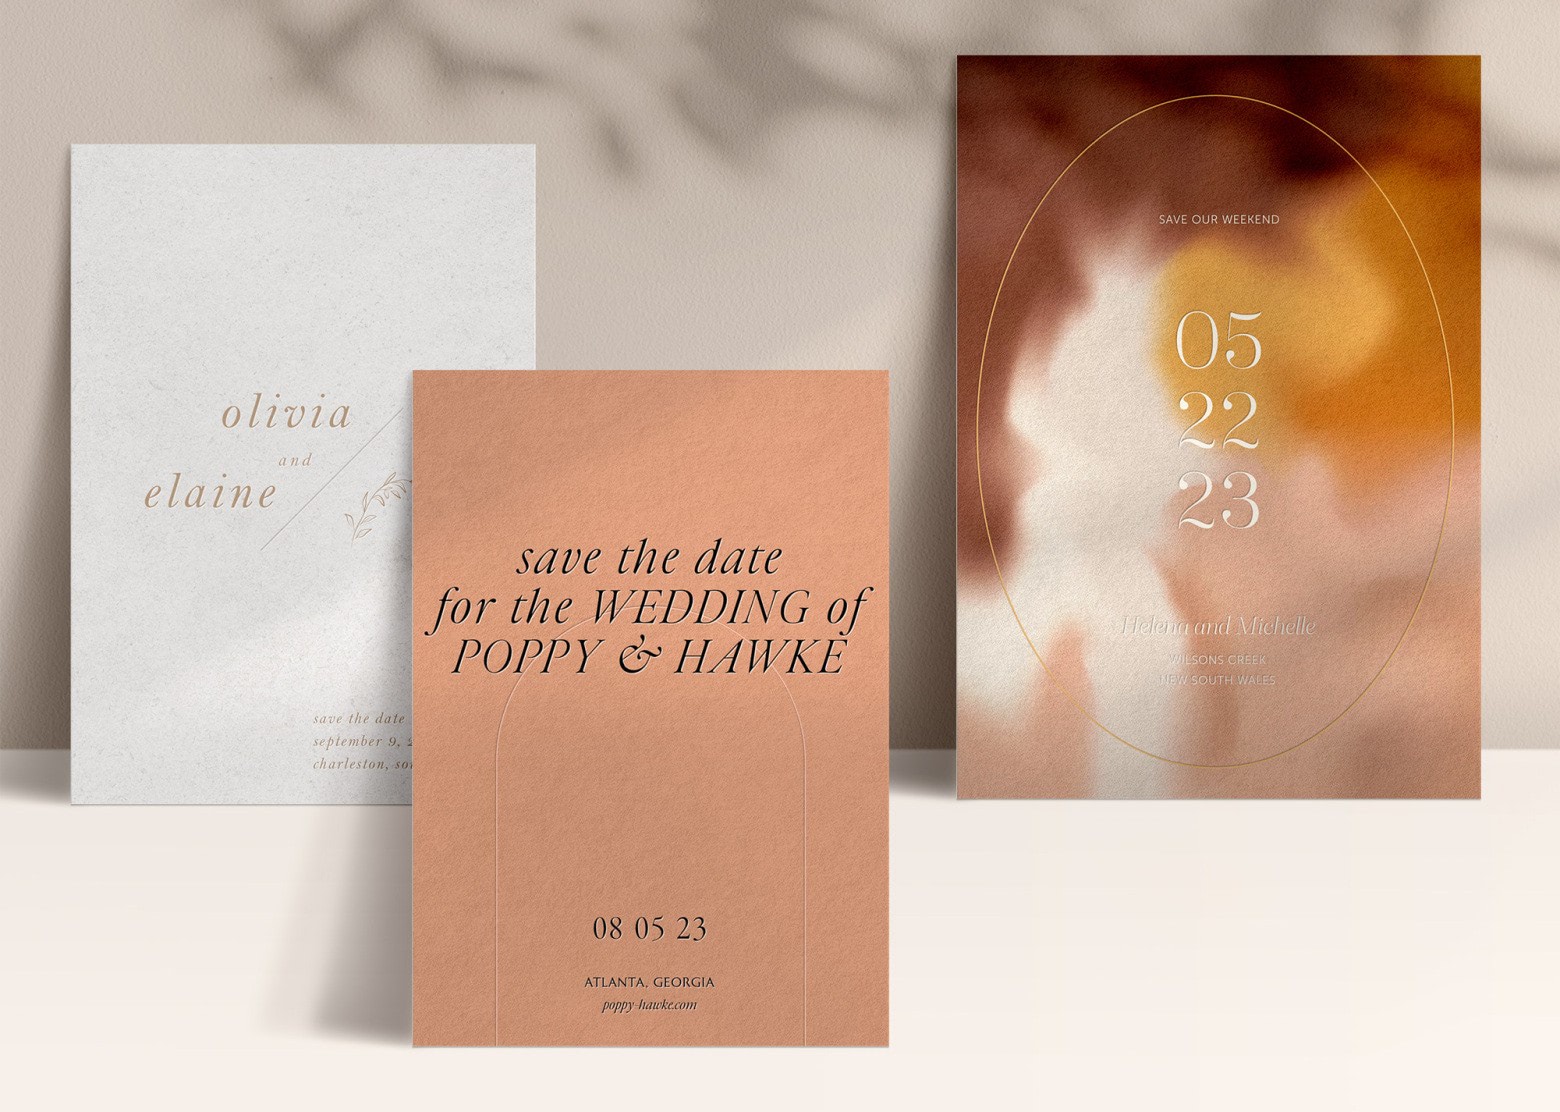 Three printed Save the Date ideas with neutral shades of orange, brown, pink and yellow